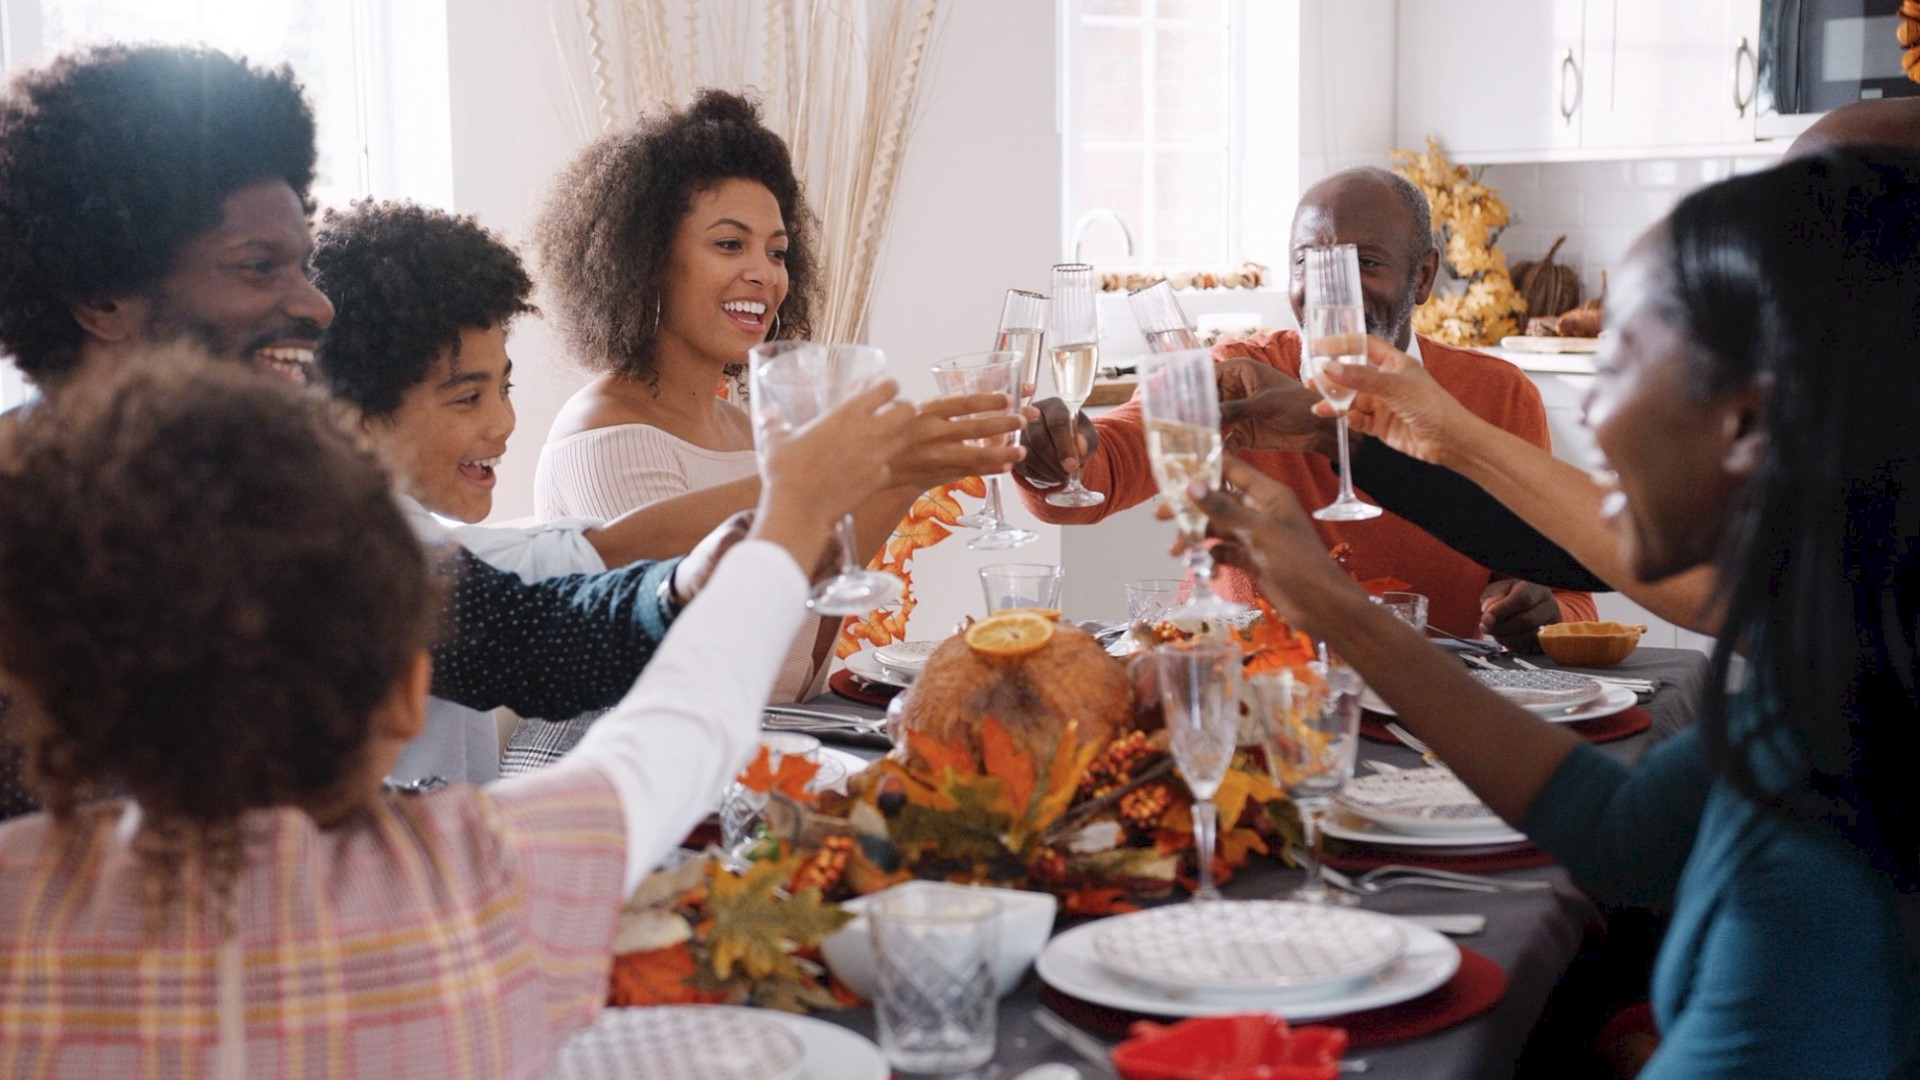 A new survey found a third of parents want to see their children in person this Thanksgiving despite the warnings from public health officials asking Americans to forgo festivities amid a coronavirus surge. Veuer's Maria Mercedes Galuppo has the story.